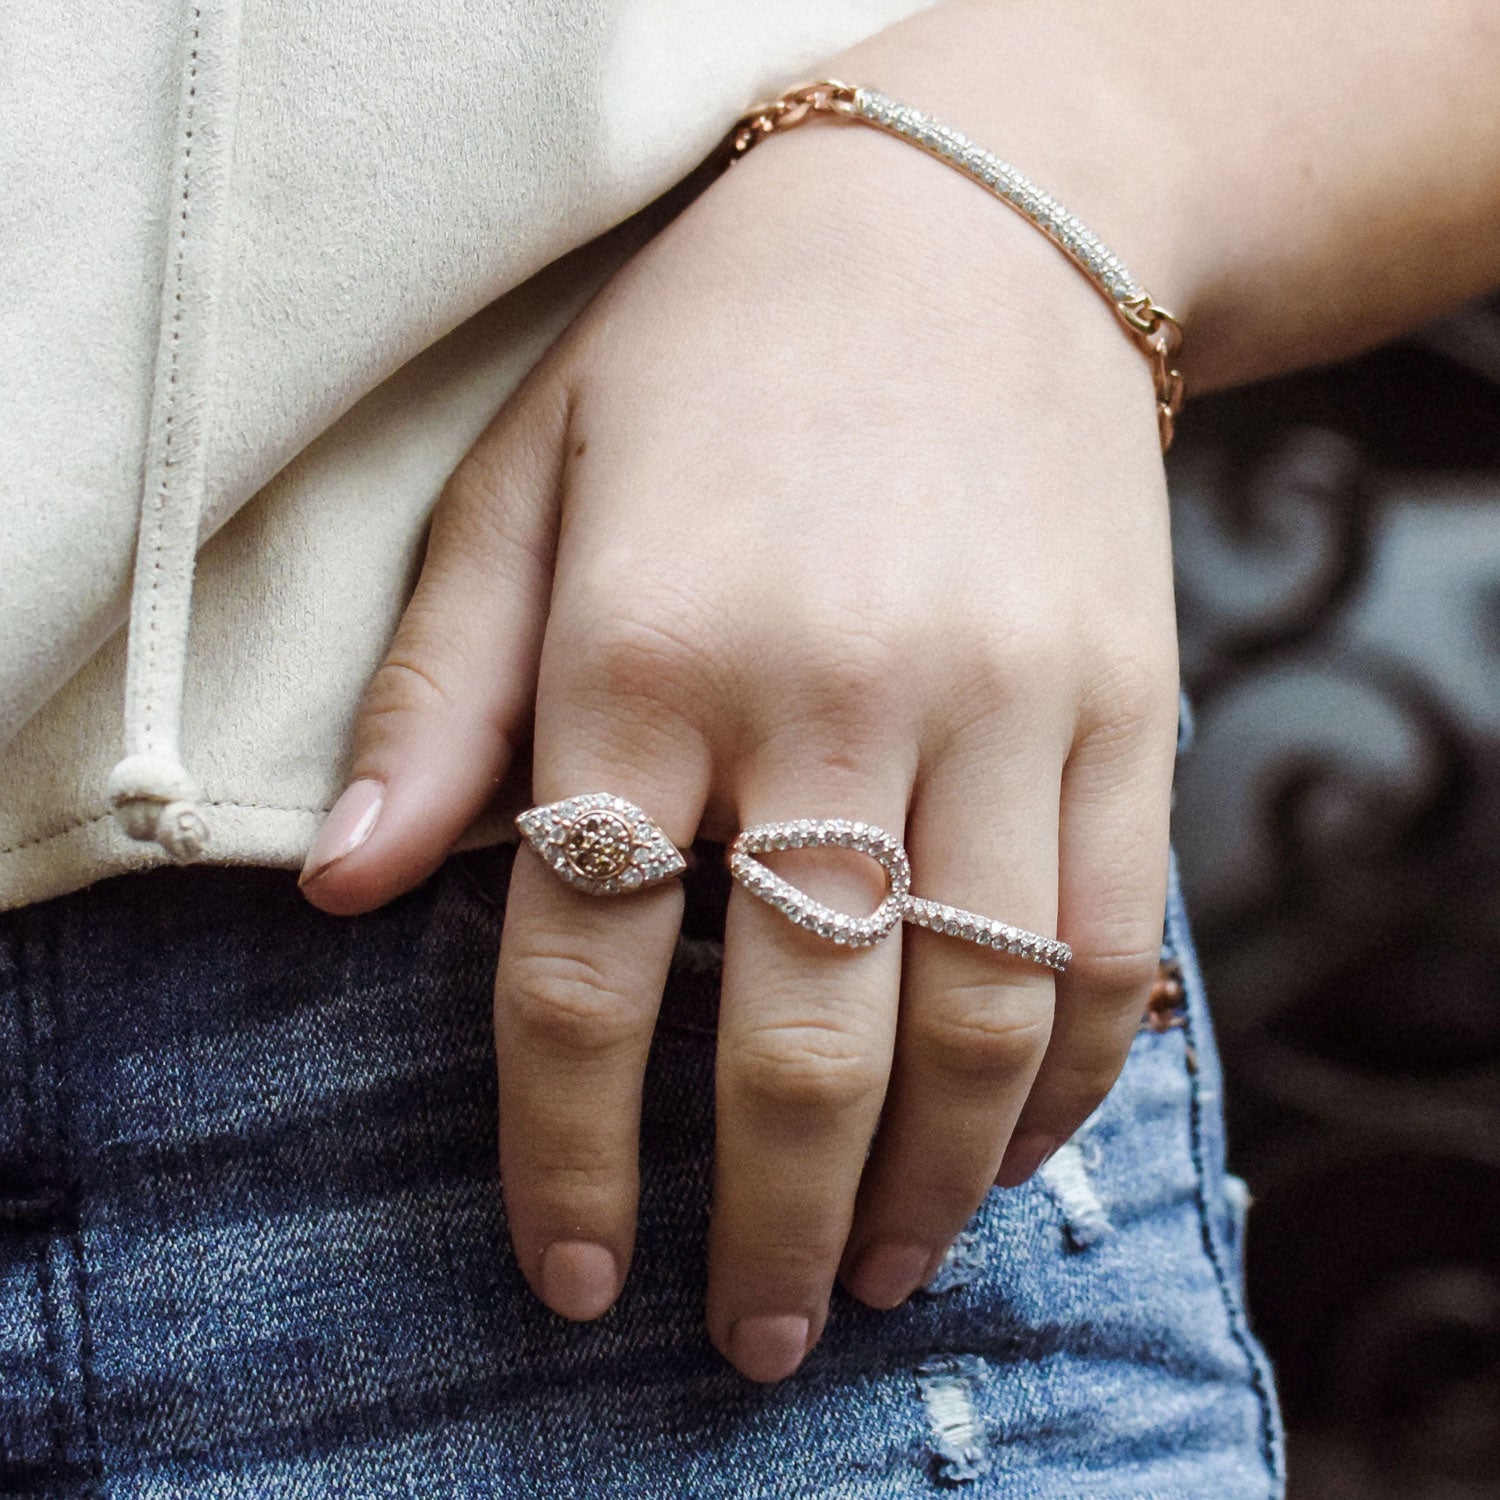 The Drishti Ring is shown paired with the beautiful double finger Athena Ring and Pantheon Bracelet.